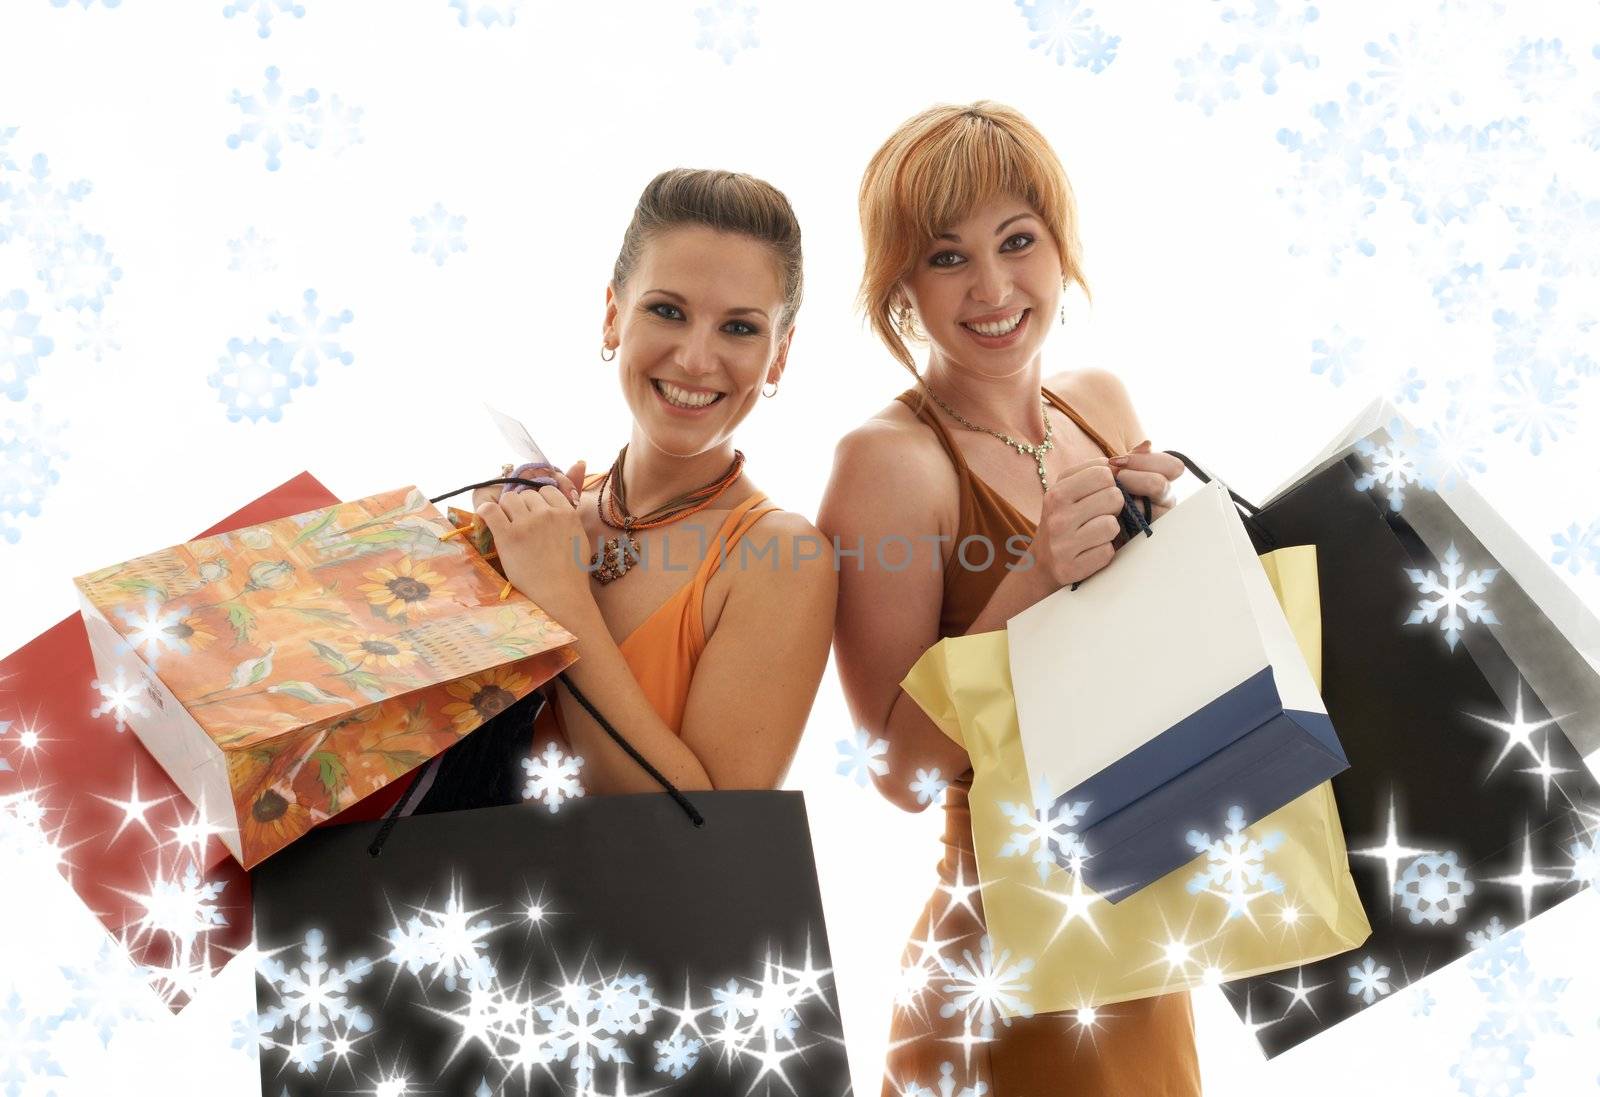 two happy girls with shopping bags and snowflakes